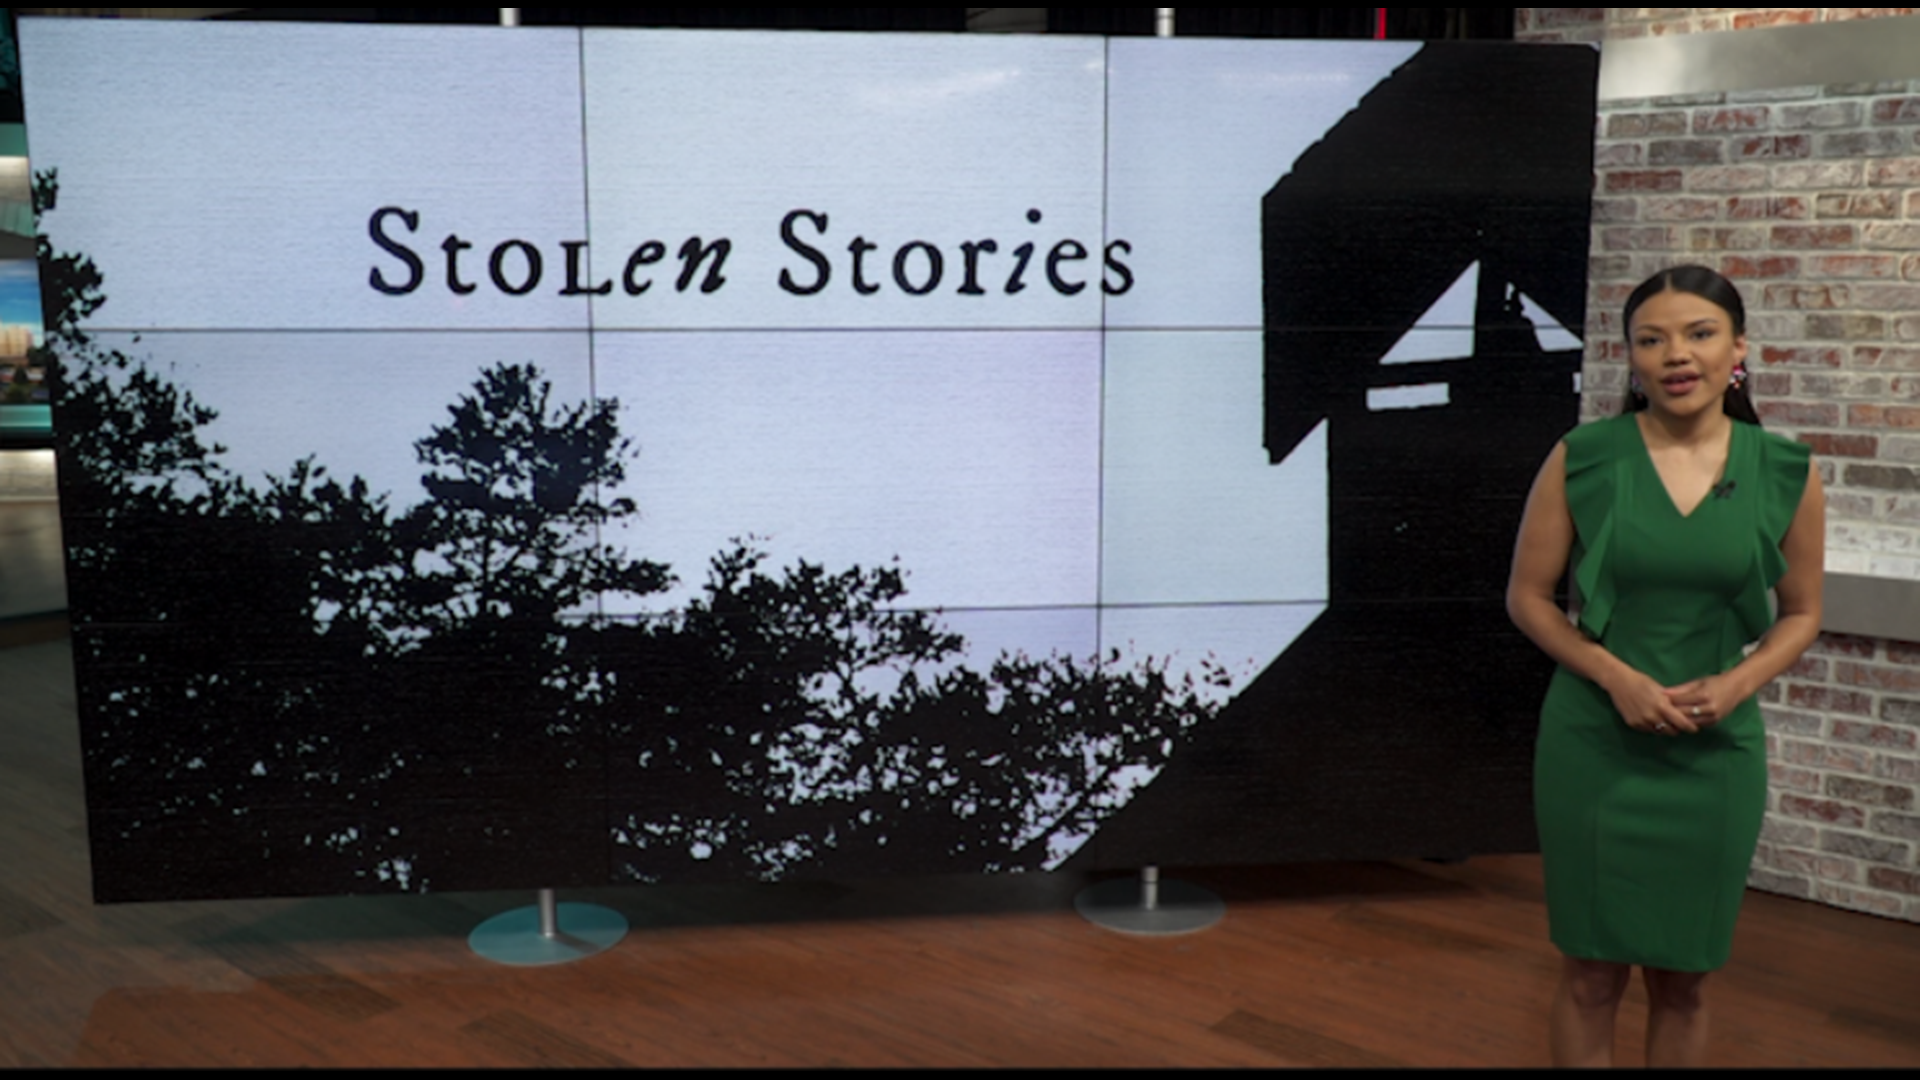 Stolen Stories is a series about Isaac and Adaline, two East Tennesseans whose families are helping tell a story history stole from them.